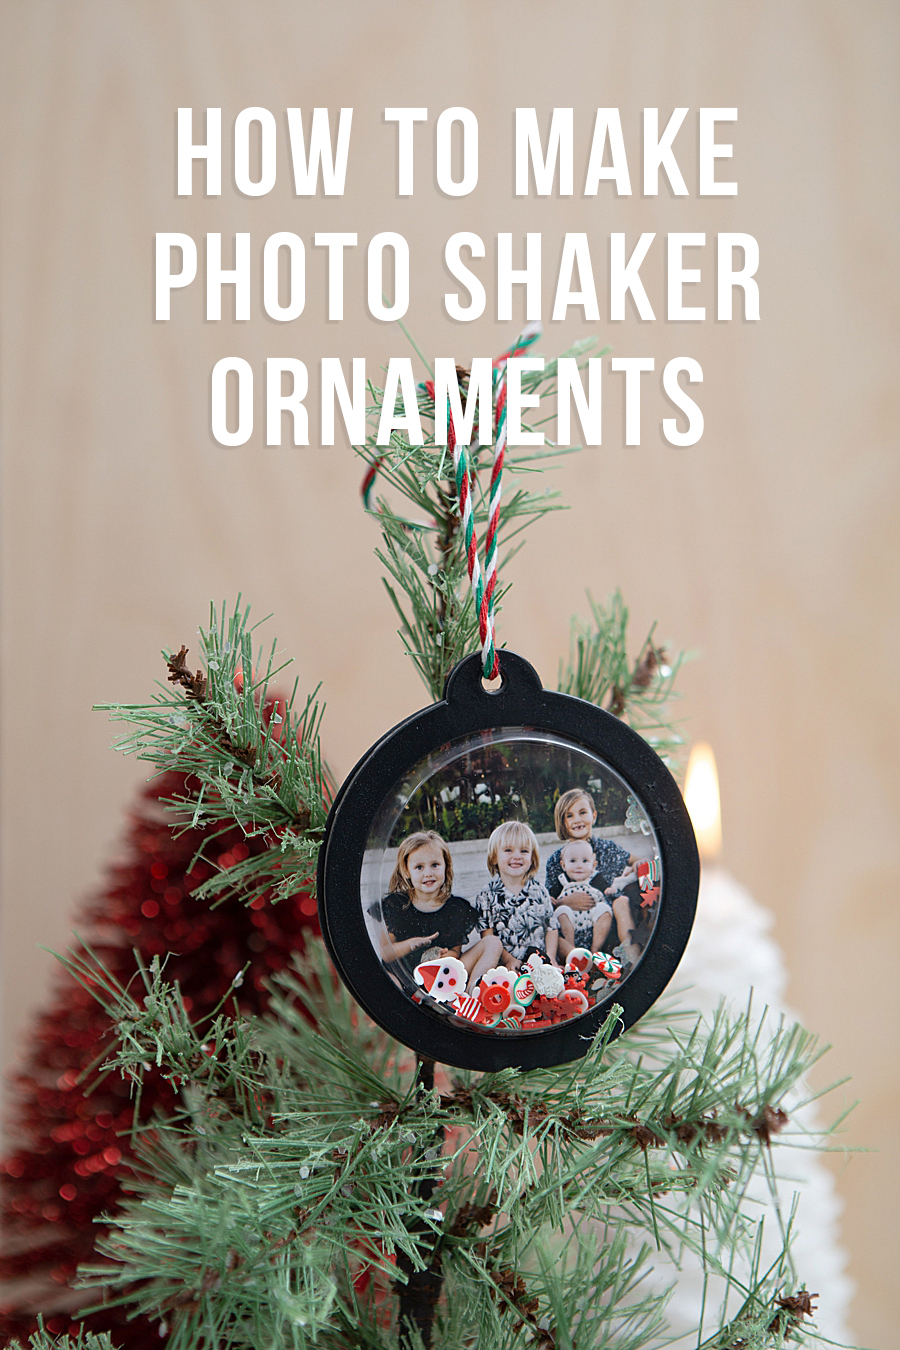 I used my Canon SELPHY to make these darling photo shaker ornaments!